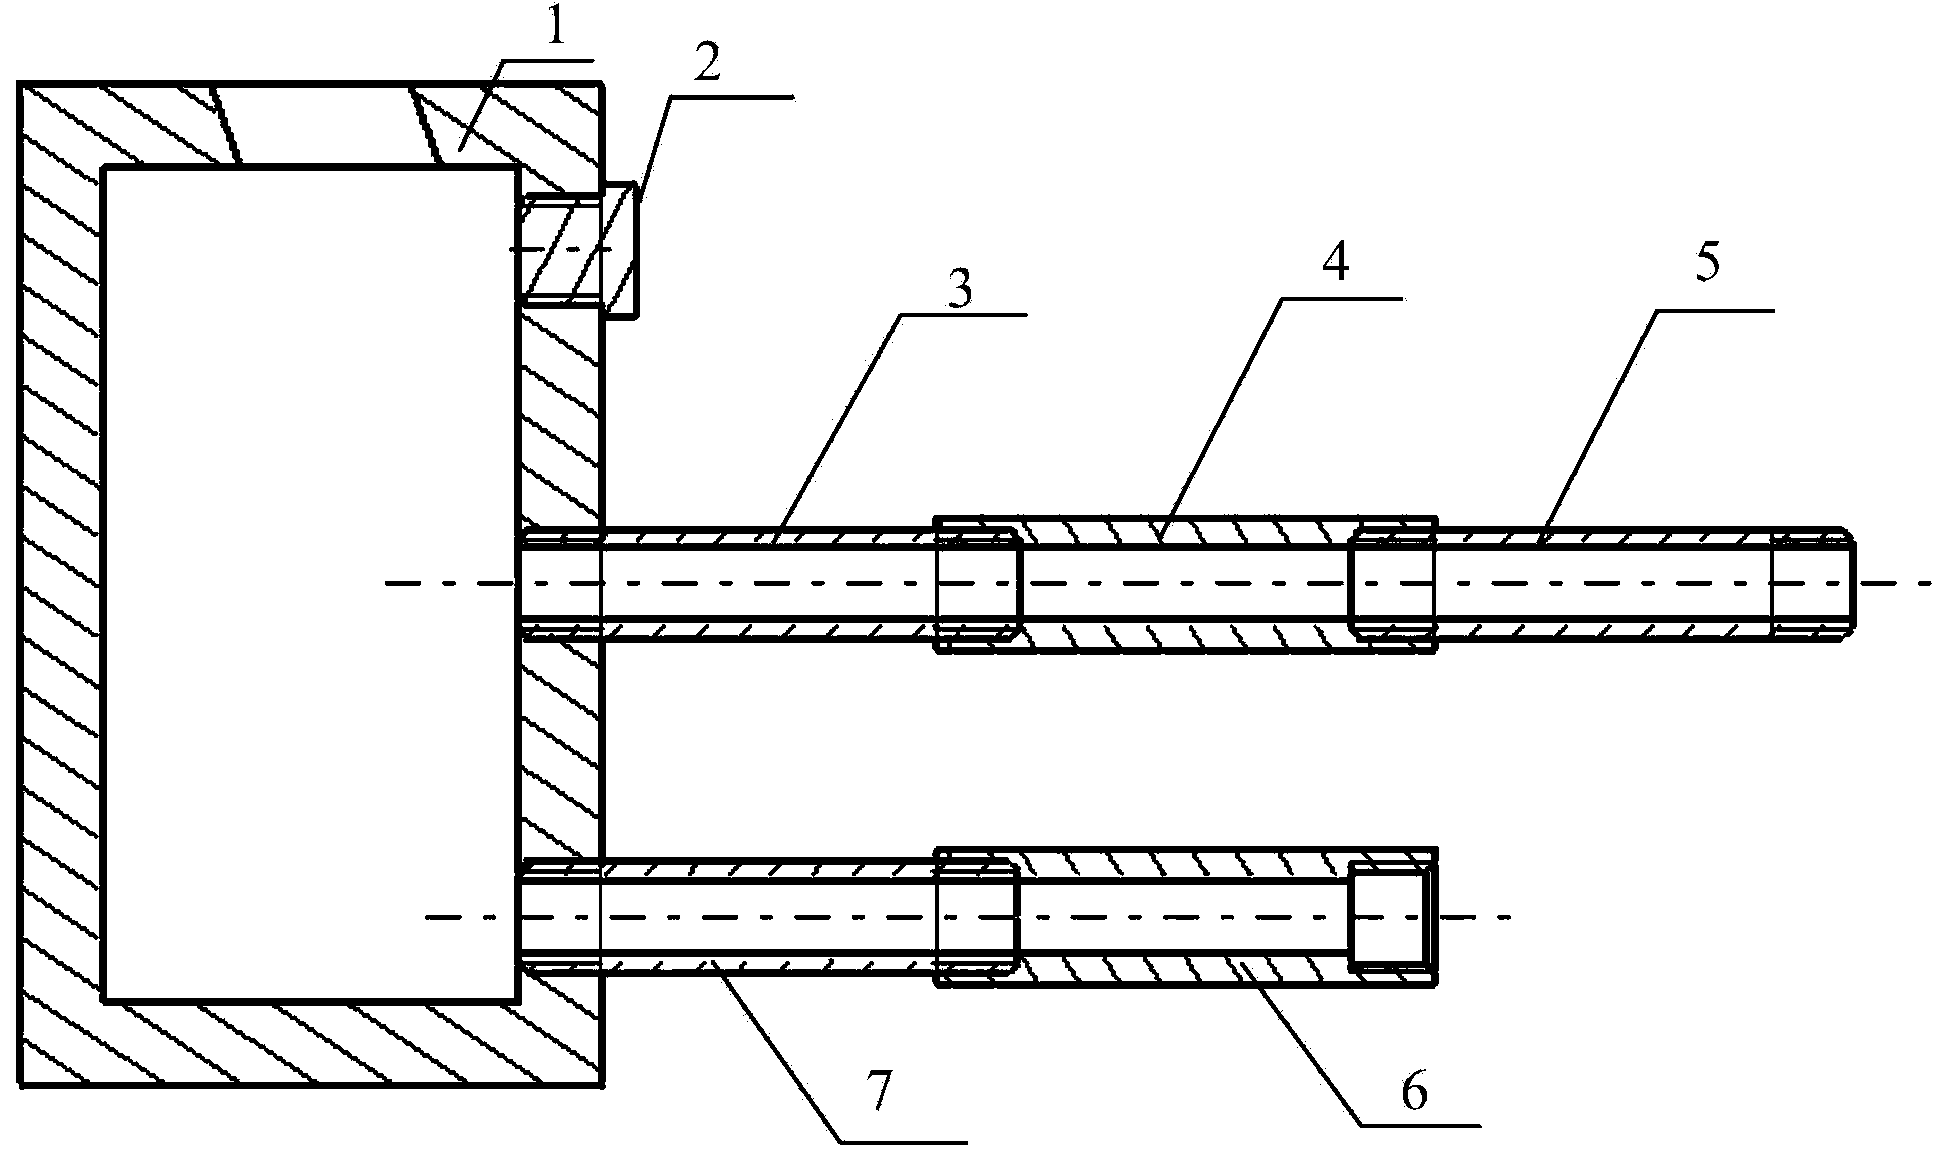 Device with changeable gas injection direction and nozzle number